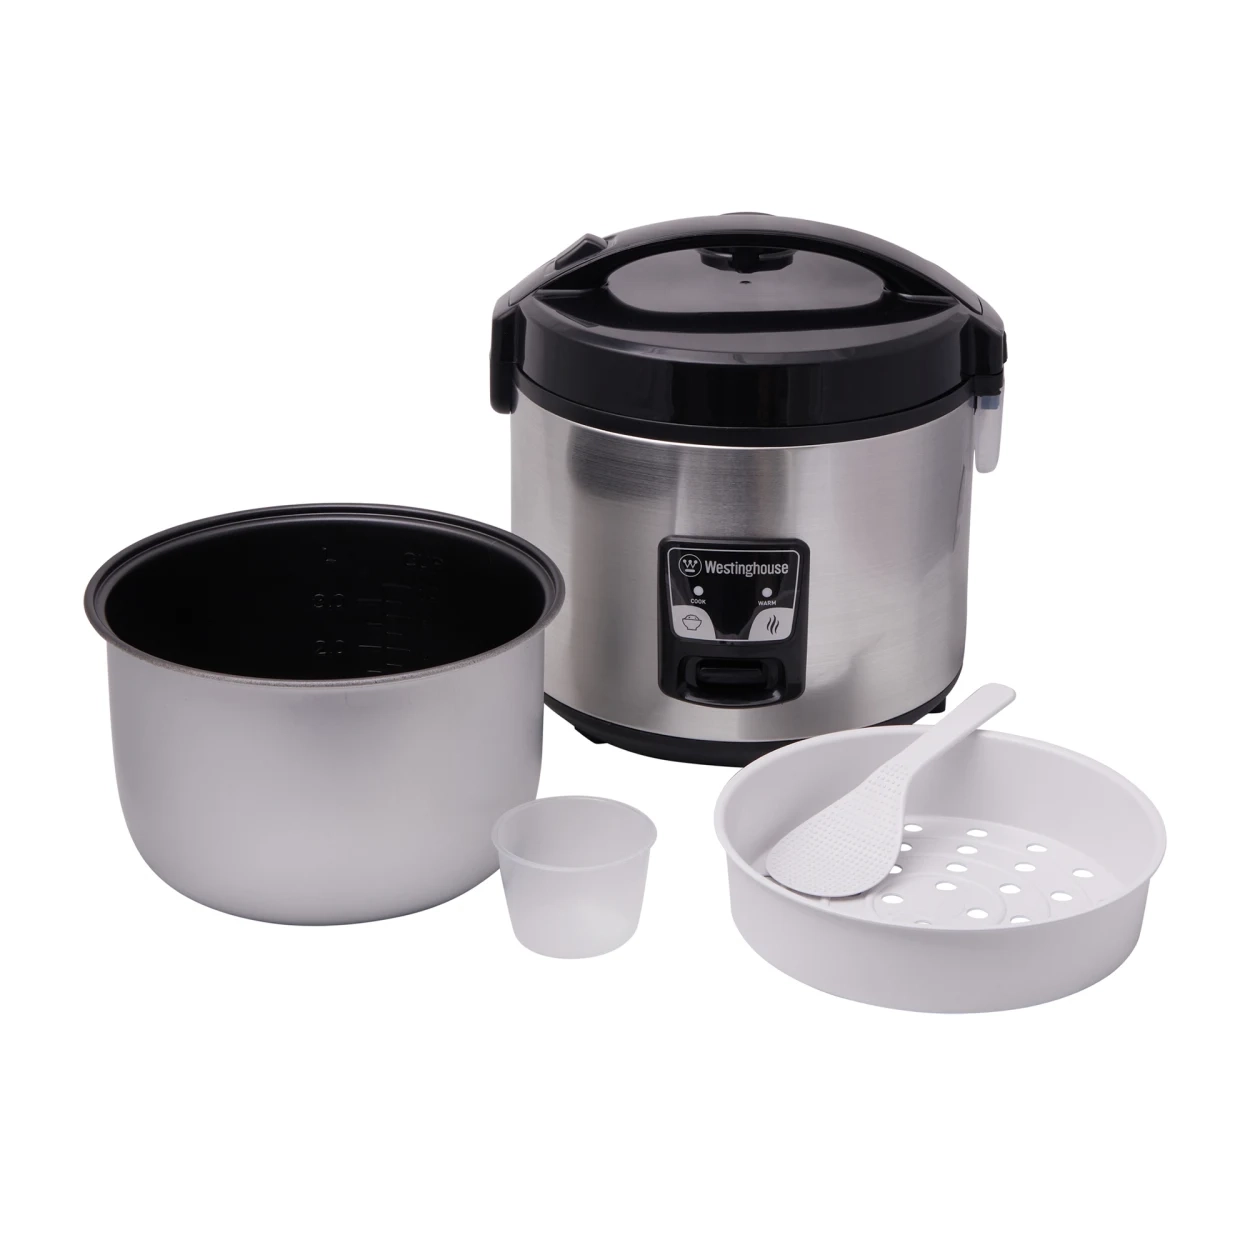 Westinghouse Rice Cooker 10 Cup Image 2